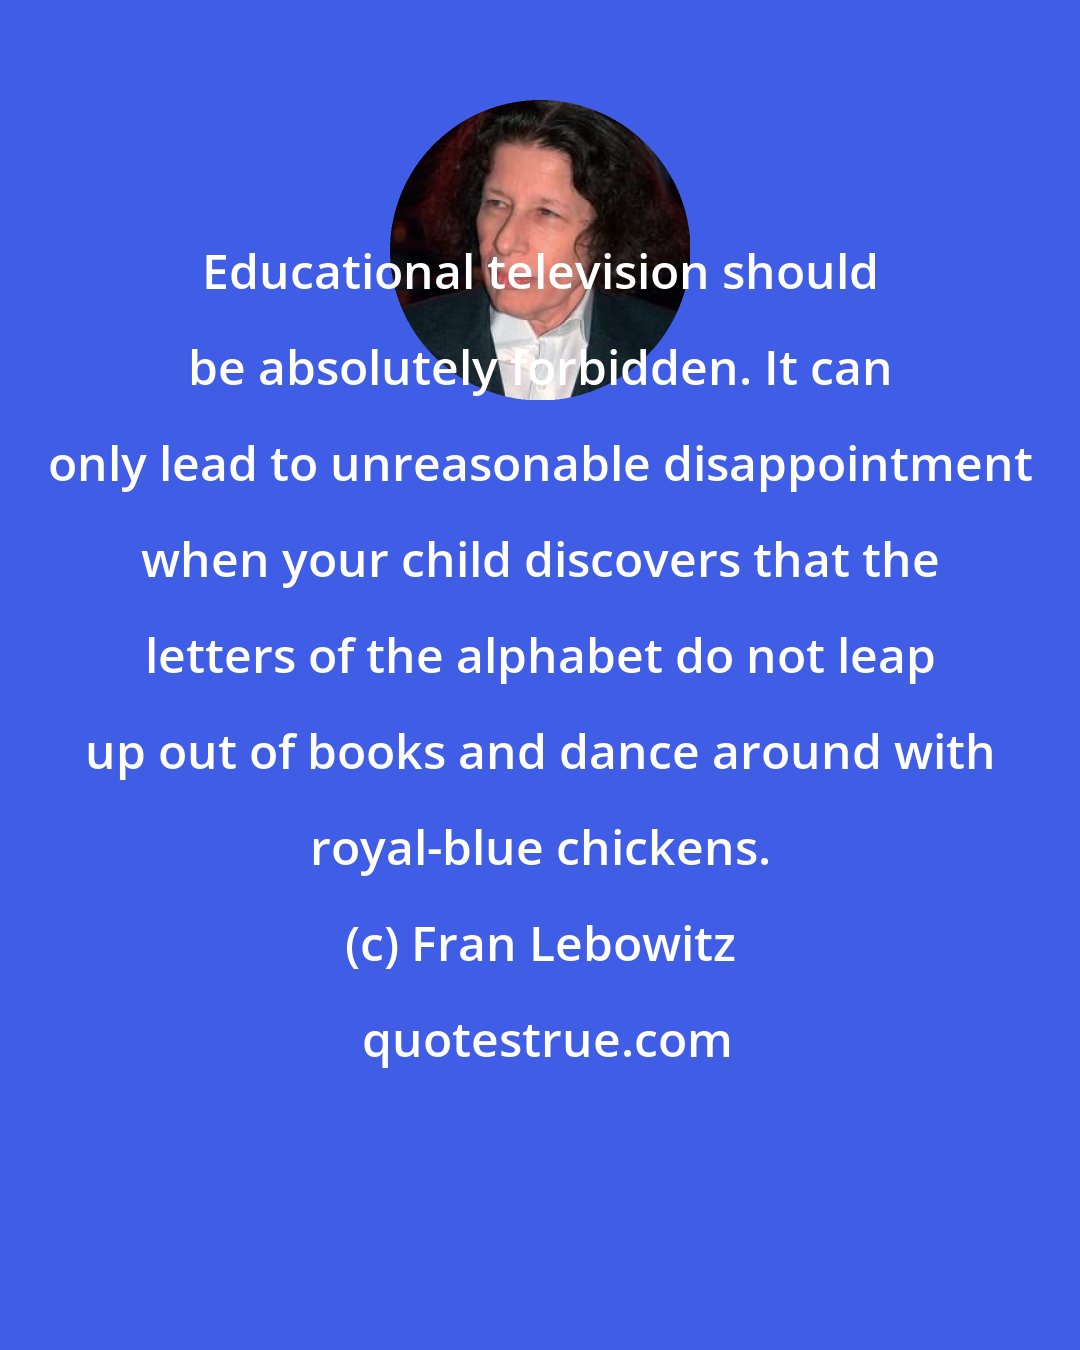 Fran Lebowitz: Educational television should be absolutely forbidden. It can only lead to unreasonable disappointment when your child discovers that the letters of the alphabet do not leap up out of books and dance around with royal-blue chickens.